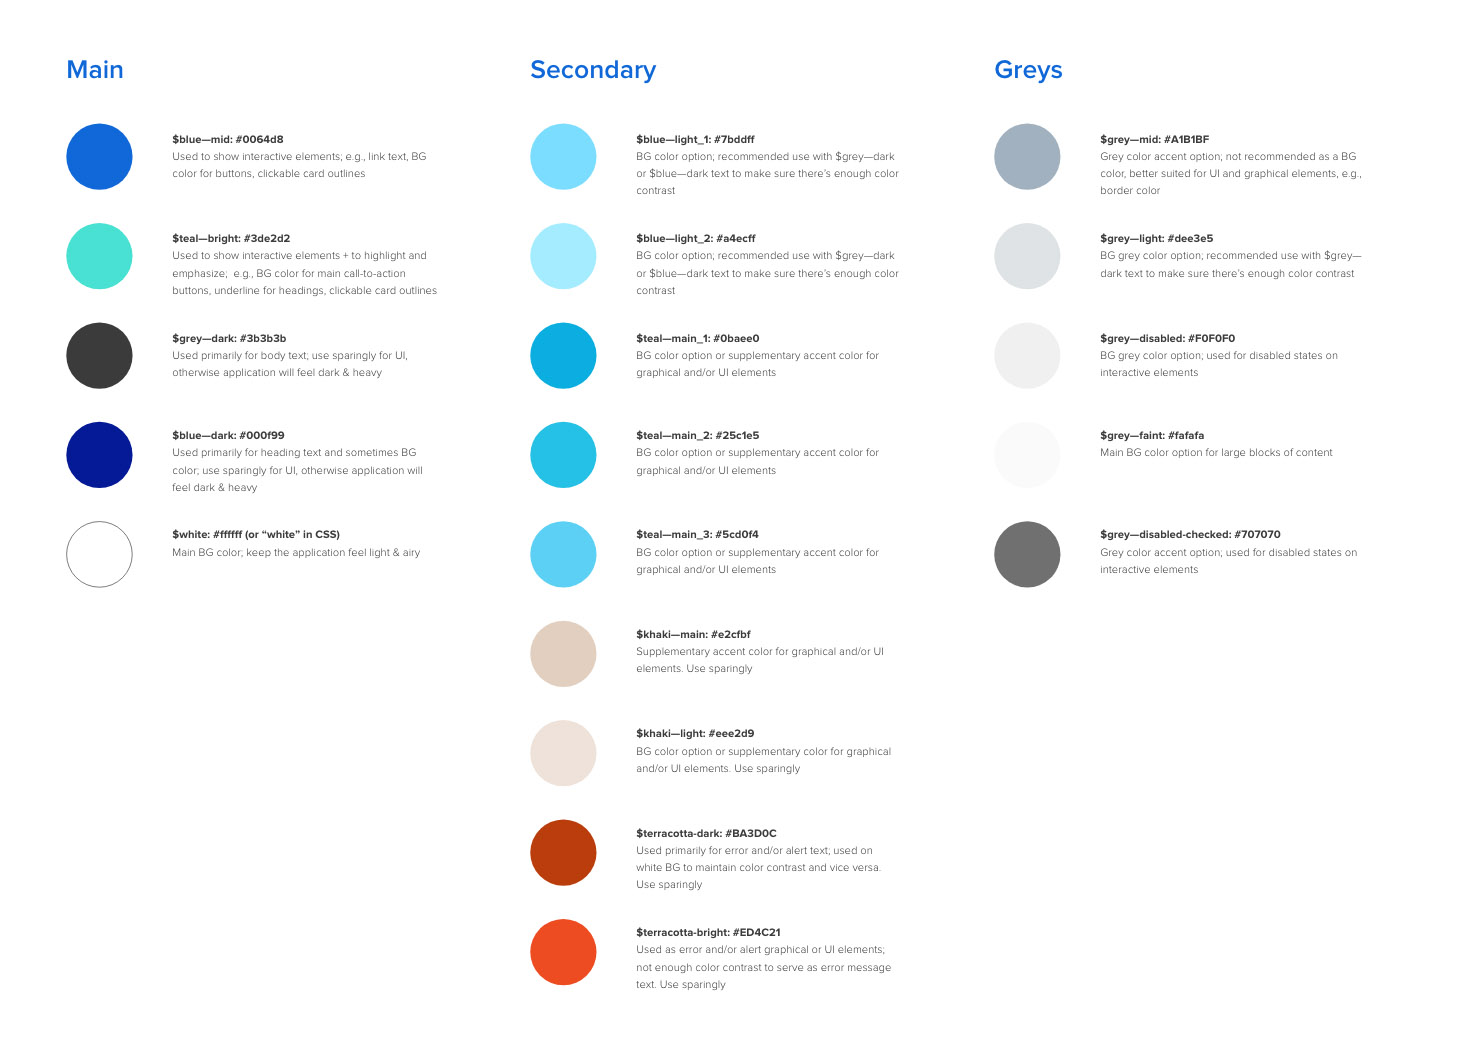 Spire brand guidelines for color palette